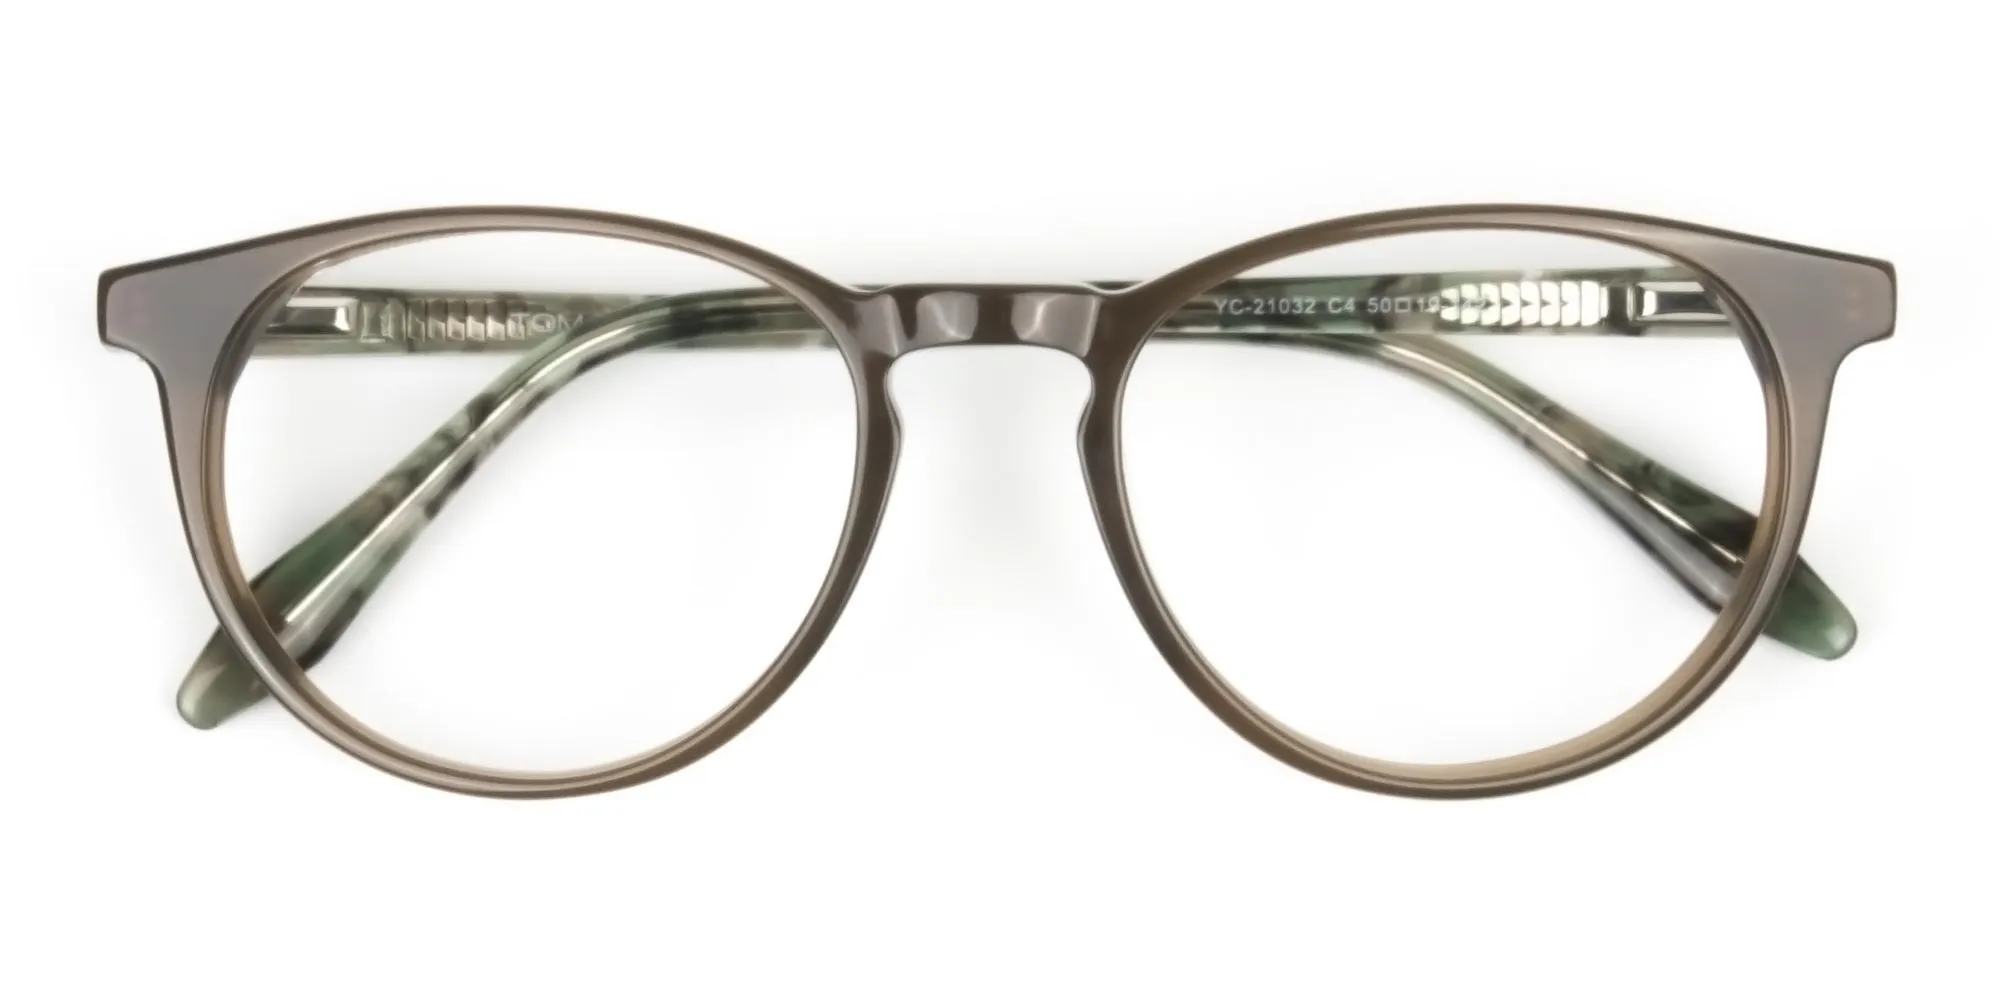 Keyhole Mocha Brown & Marble Hunter Green Glasses in Round - 2